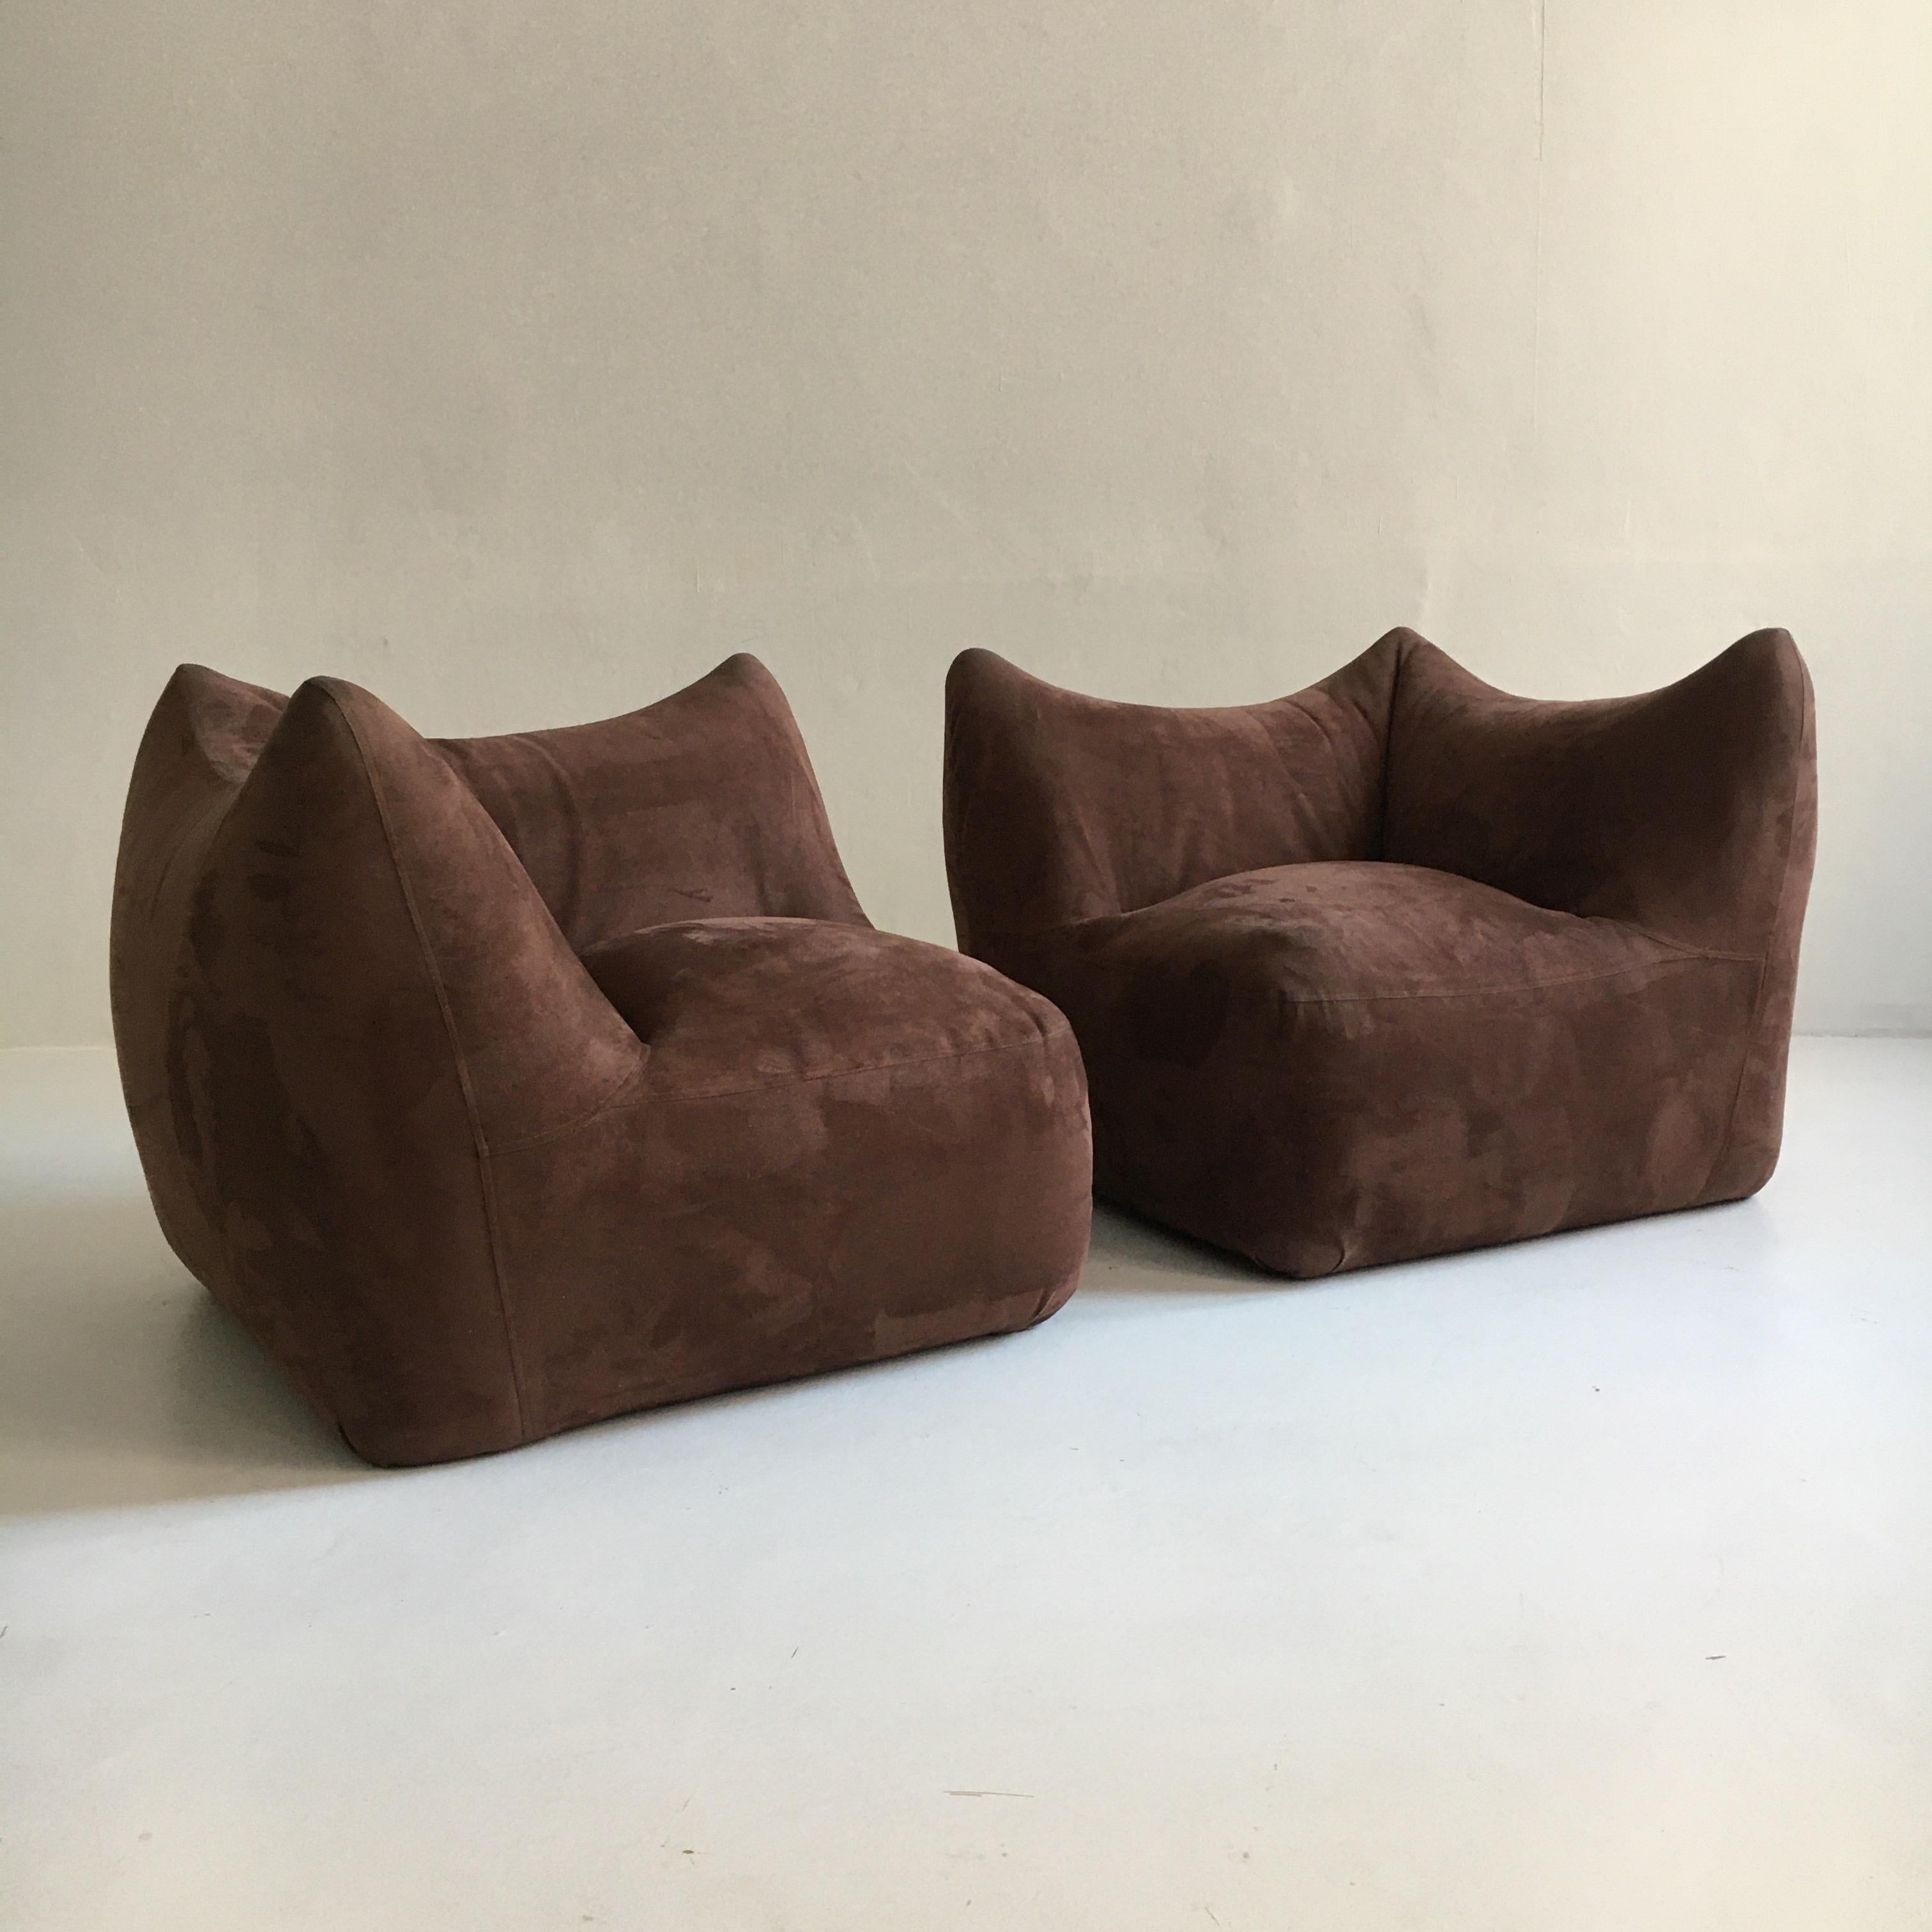 Fabric Mario Bellini 'Le Bambole' Two Modular Elements, Pair of Lounge Chairs, Italy